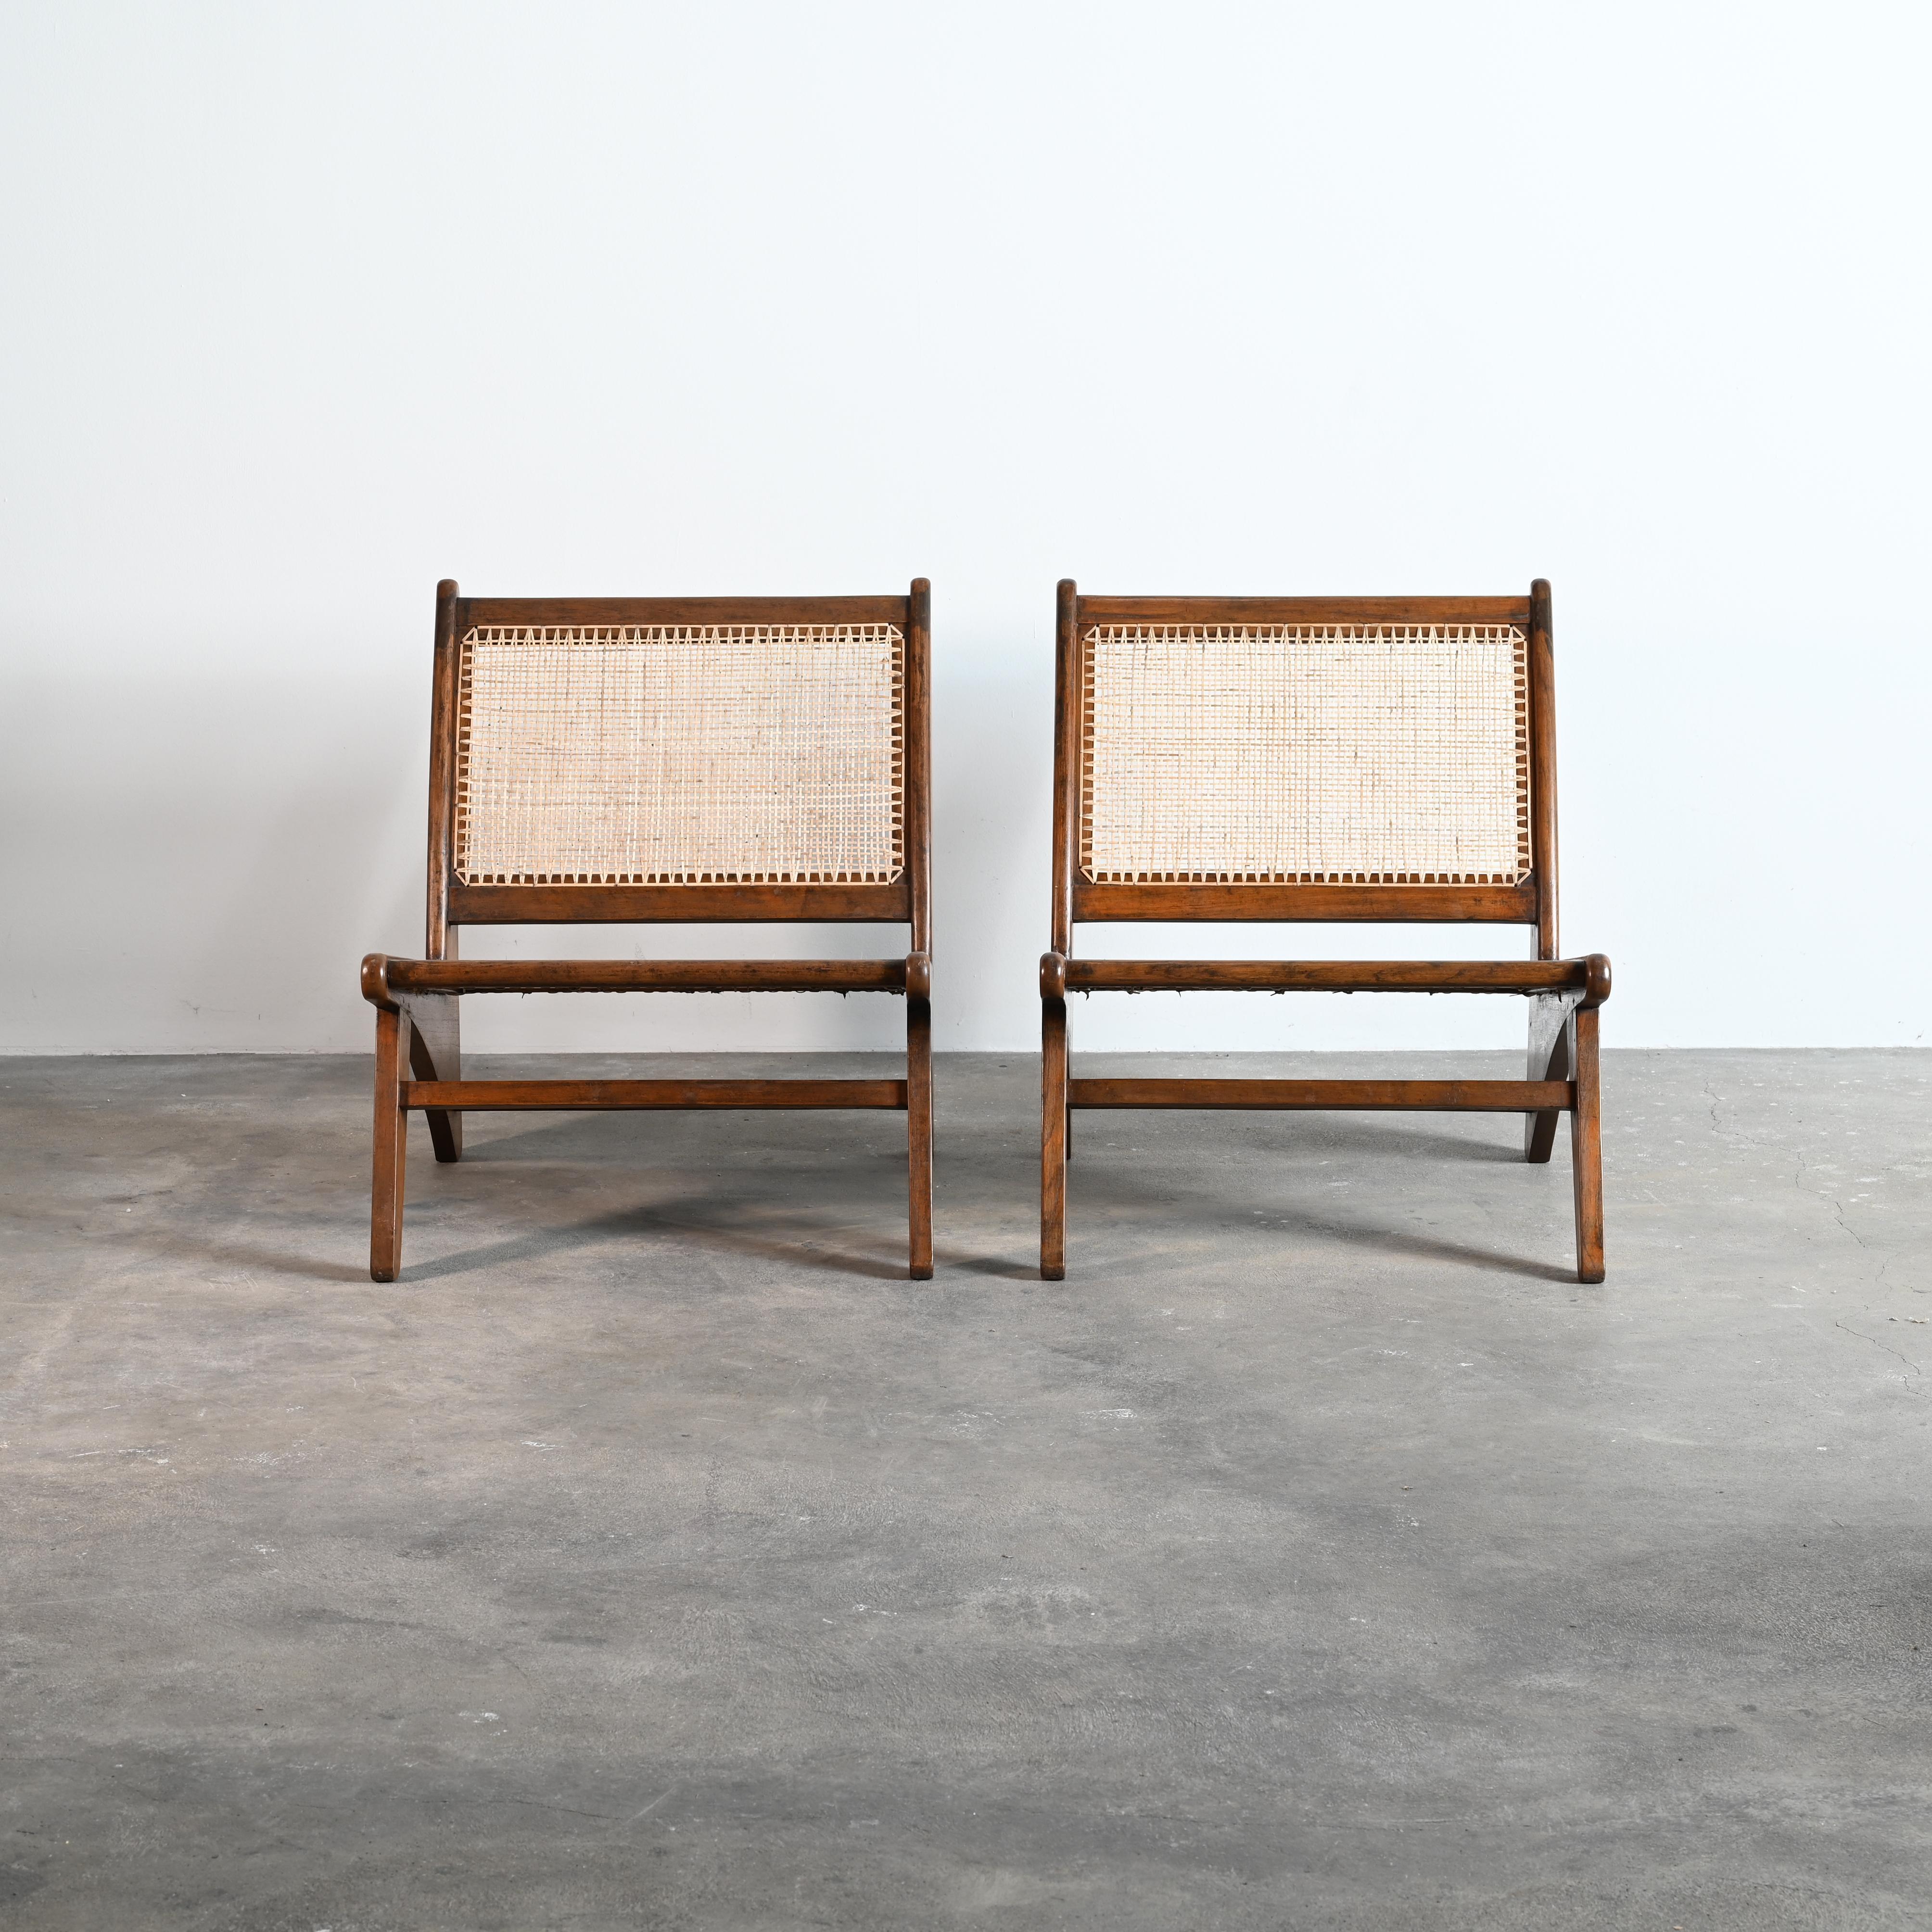 Pair of original and rare version of the easy chair by Pierre Jeanneret comes with a curved back leg and a front leg outside the continuation of the lateral frame. This feature adds to the exceptional appearance of this iconic object. Consisting of